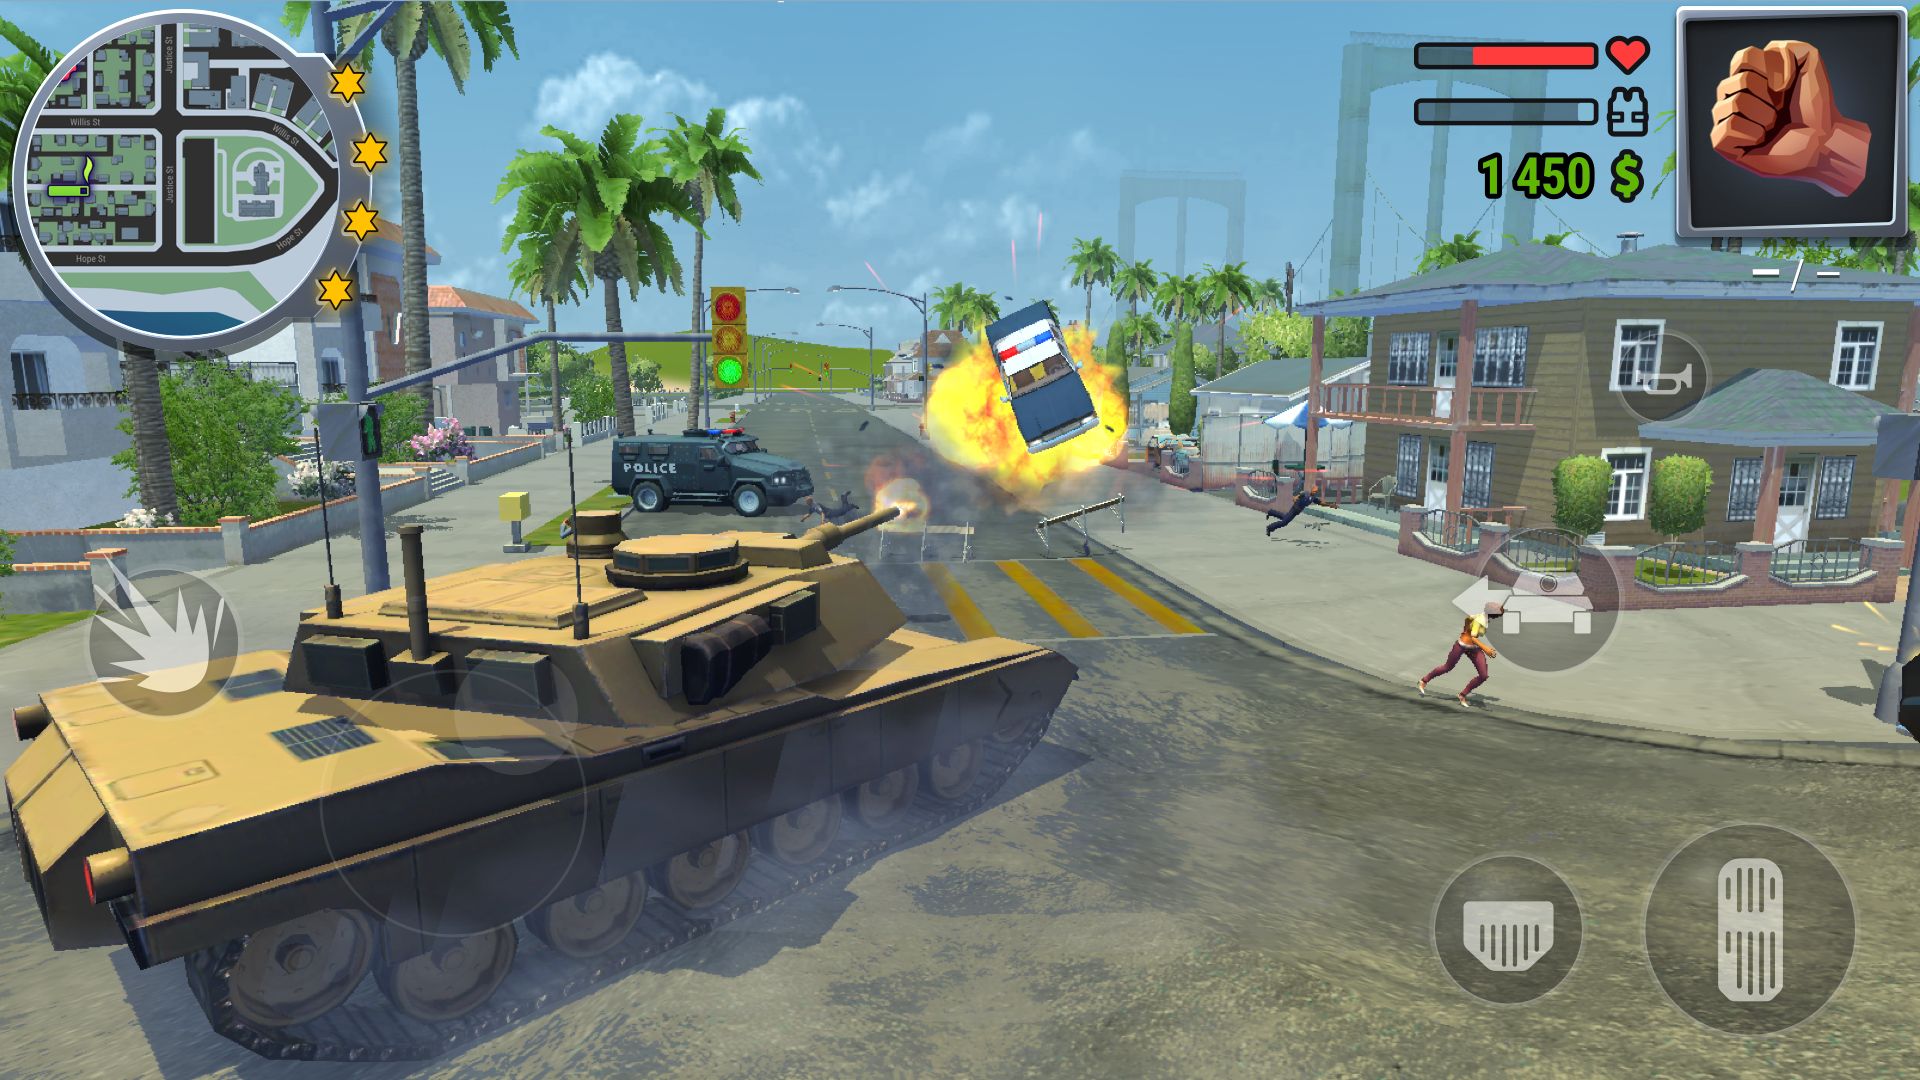 Download Games like GTA for Android - Best free Like GTA games APK